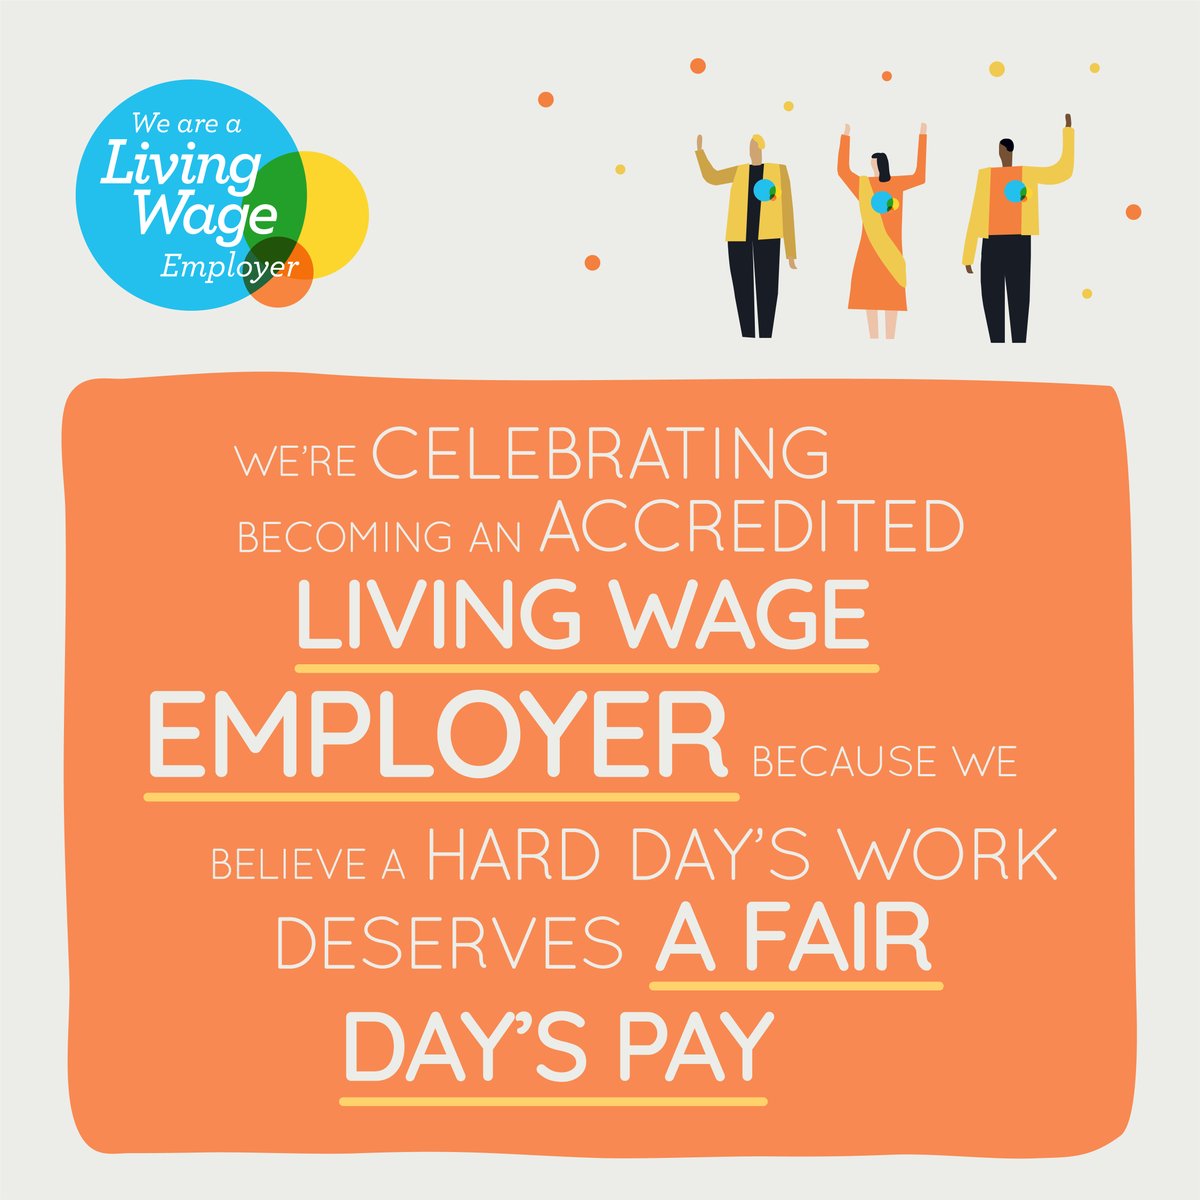 We've been a real Living Wage employer for a few years now, but we're still celebrating! Every day at the foodbank we see how important fairly paid, secure work is - and how difficult it is for workers in low-paid, insecure work, especially when there's no sick pay.